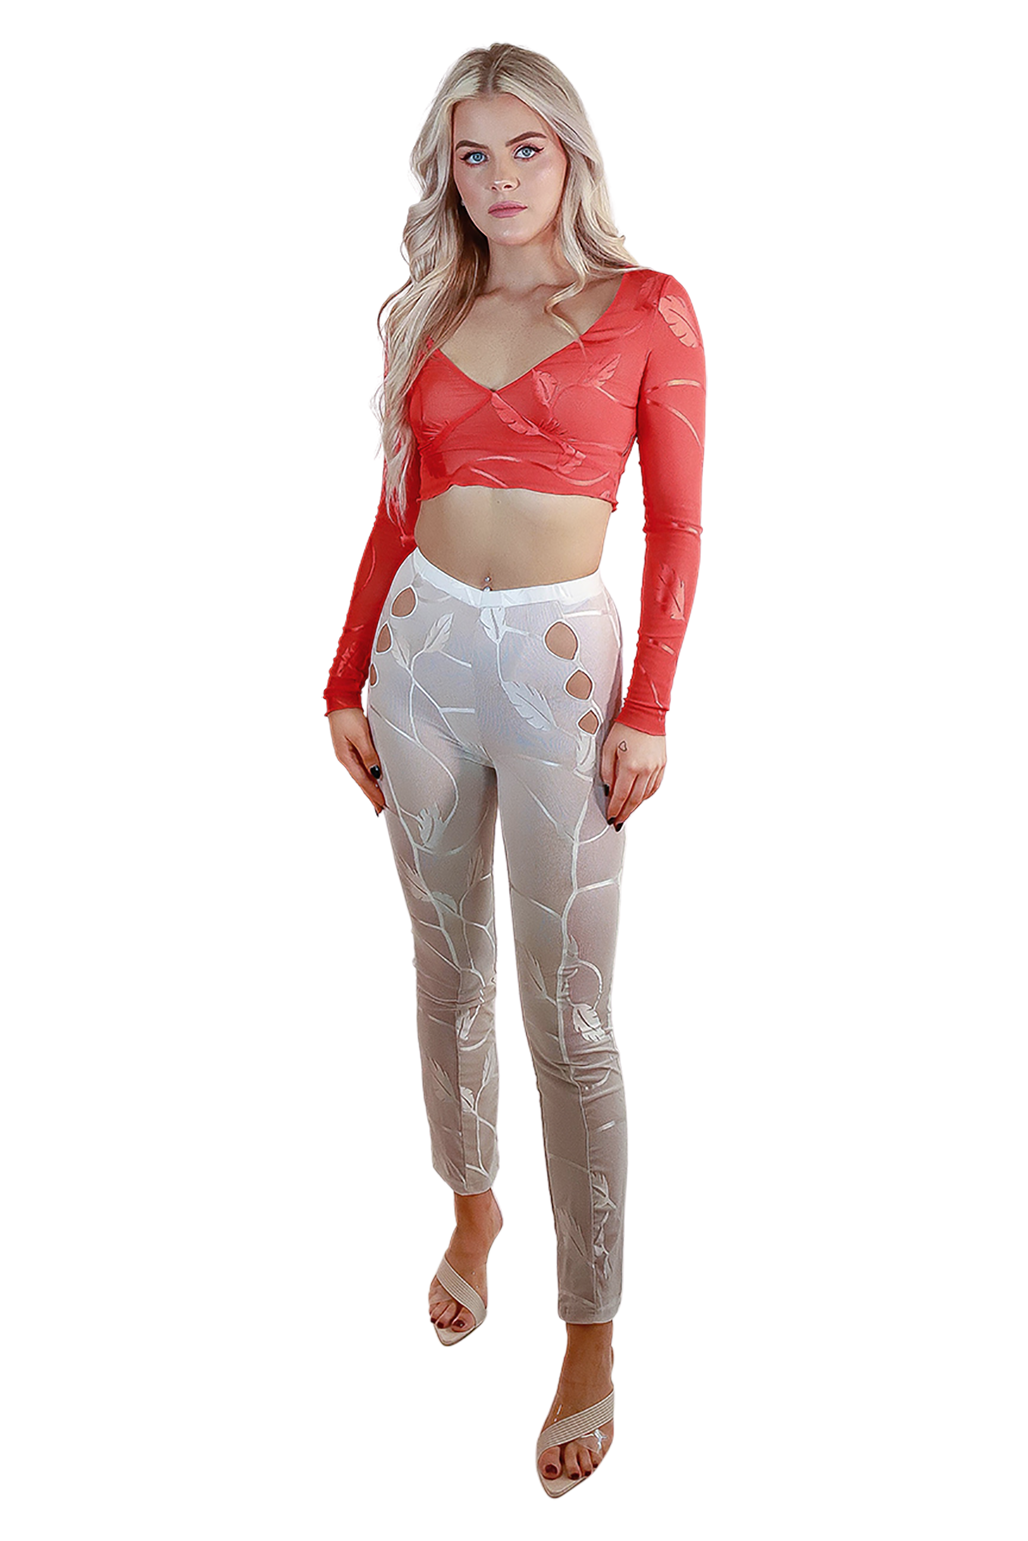 Mesh Red Foliage Hot Extra Long-Sleeve Flare V-Neck Flattering Floral Crop